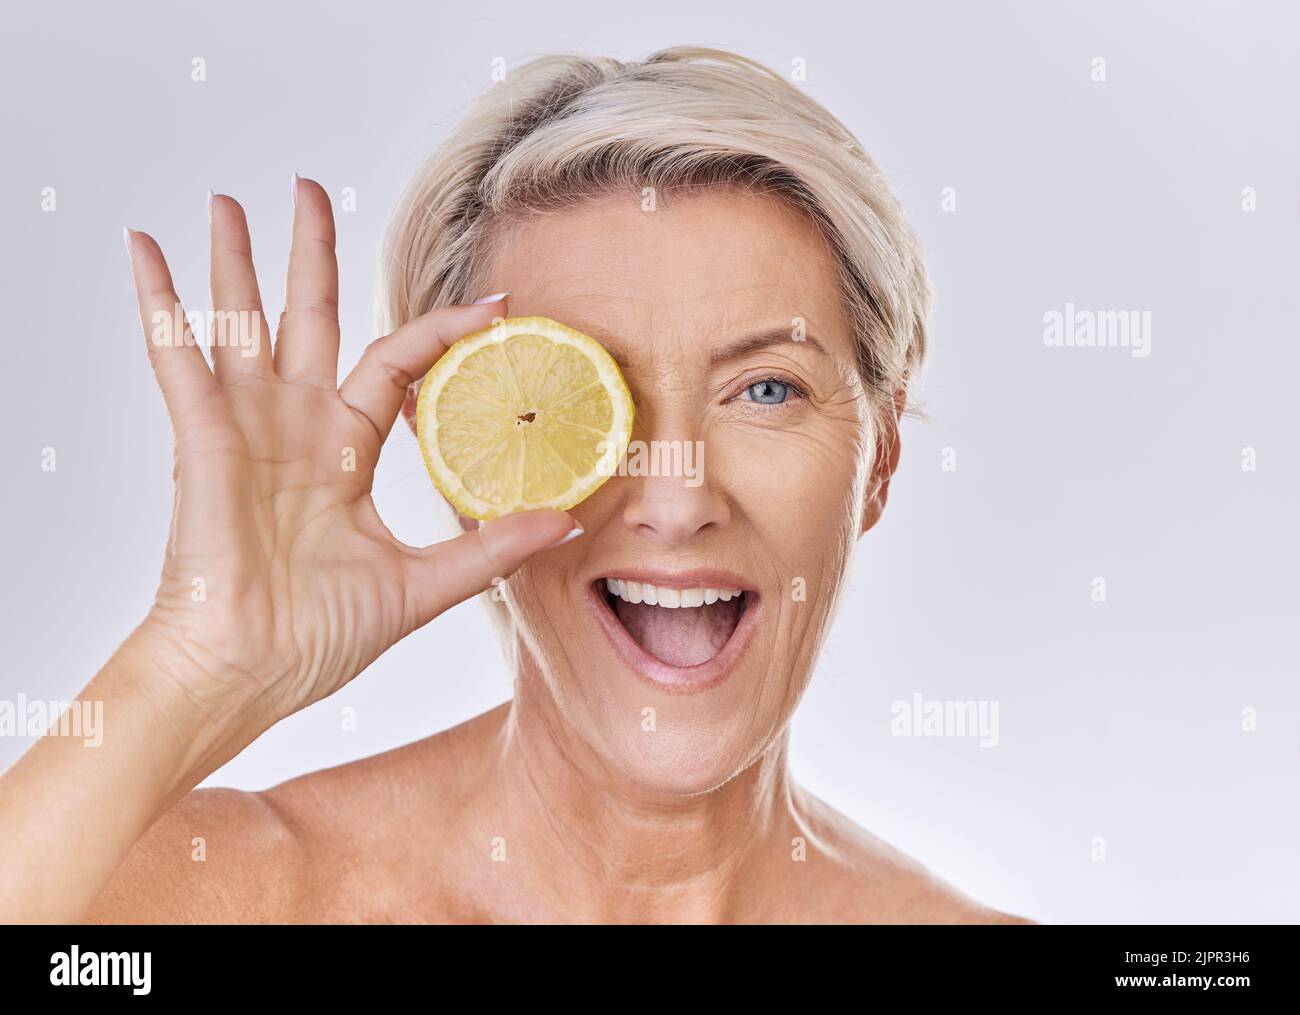 Skincare, wellness and face of mature woman with wrinkles holding lemon with nutrition, vitamins and health. Portrait of happy senior lady with fruit Stock Photo